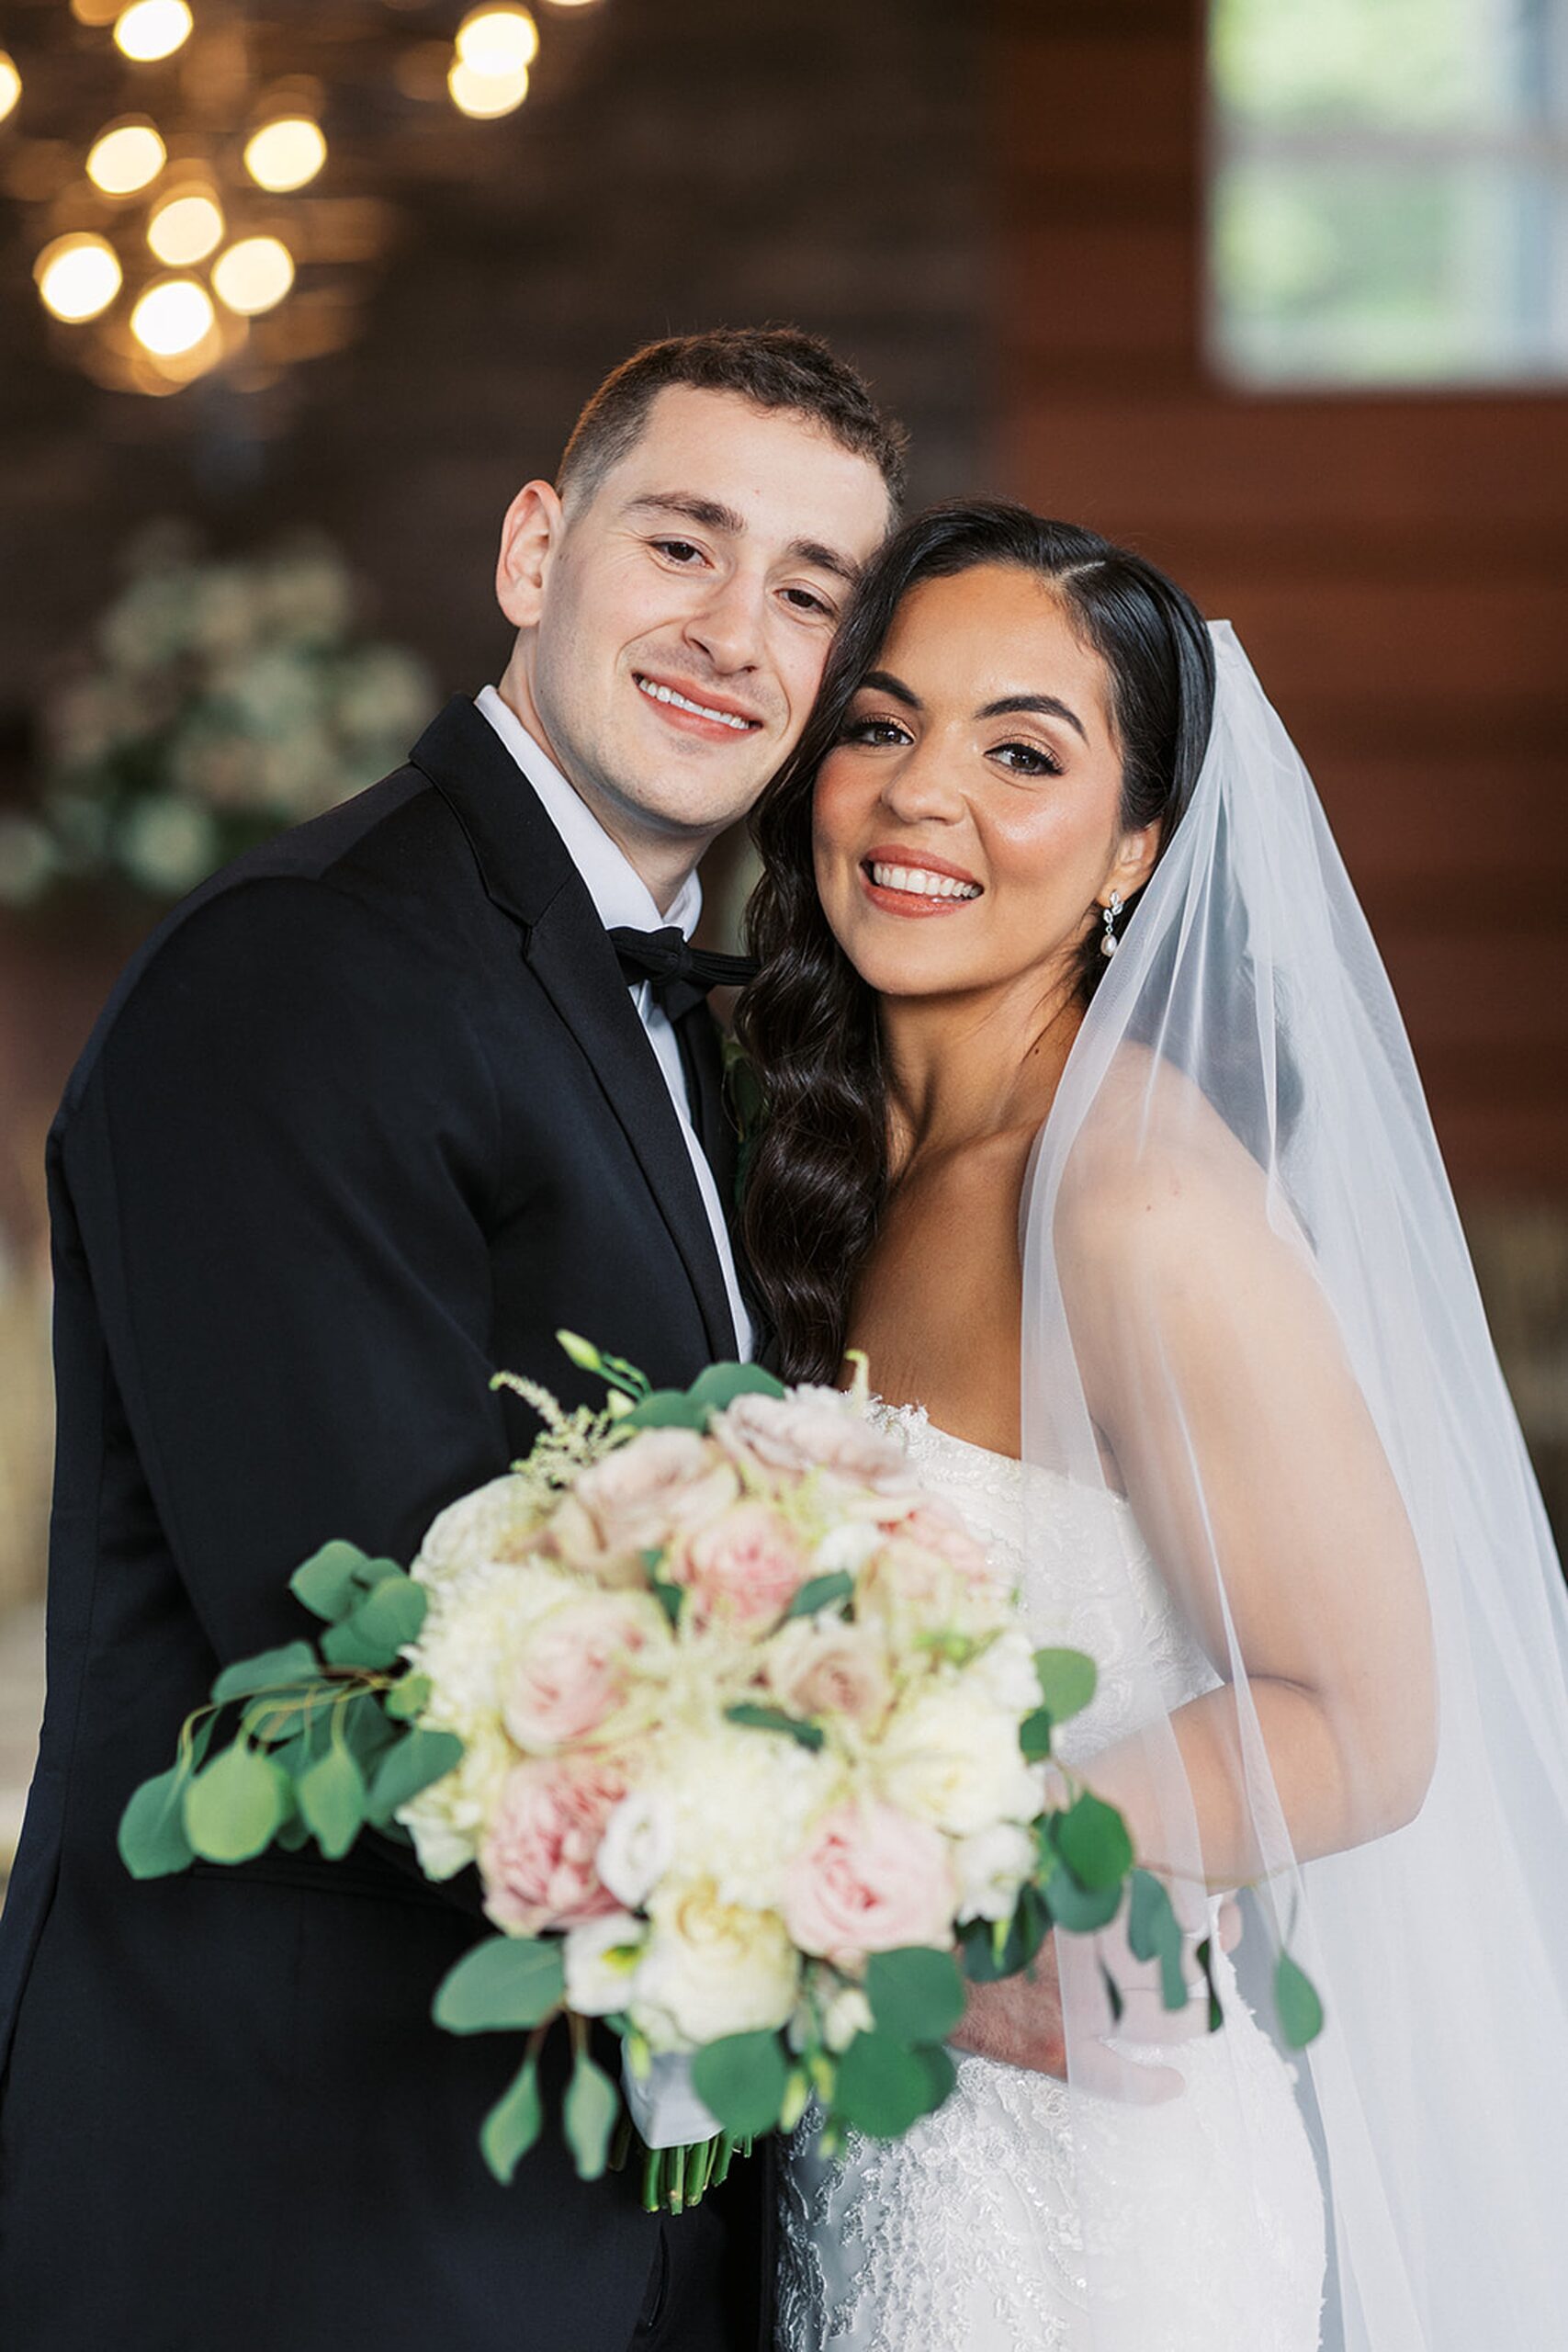 Newlyweds embrace while standing in their reception venue holding the bouquet